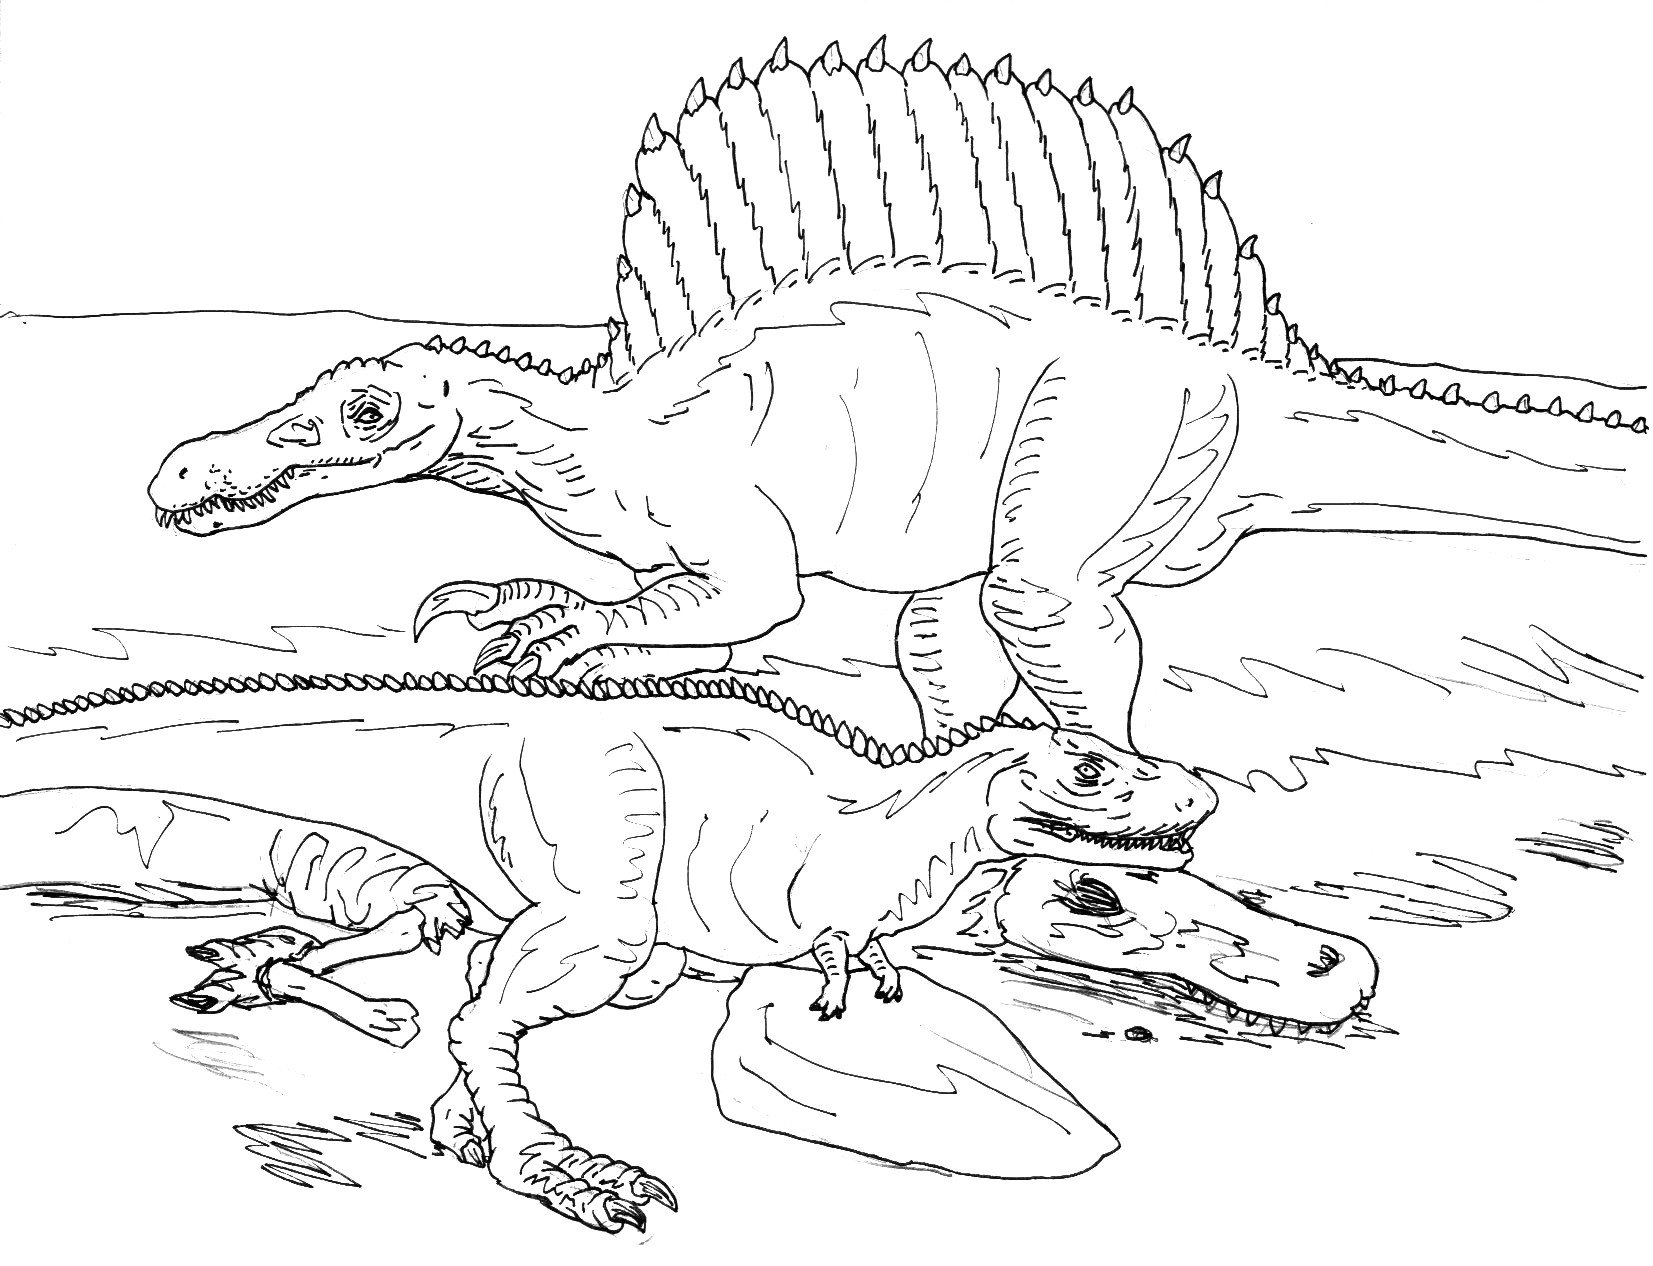 Spinosaurus Coloring Pages
 Spinosaurus VS Rugops BW by avancna on DeviantArt